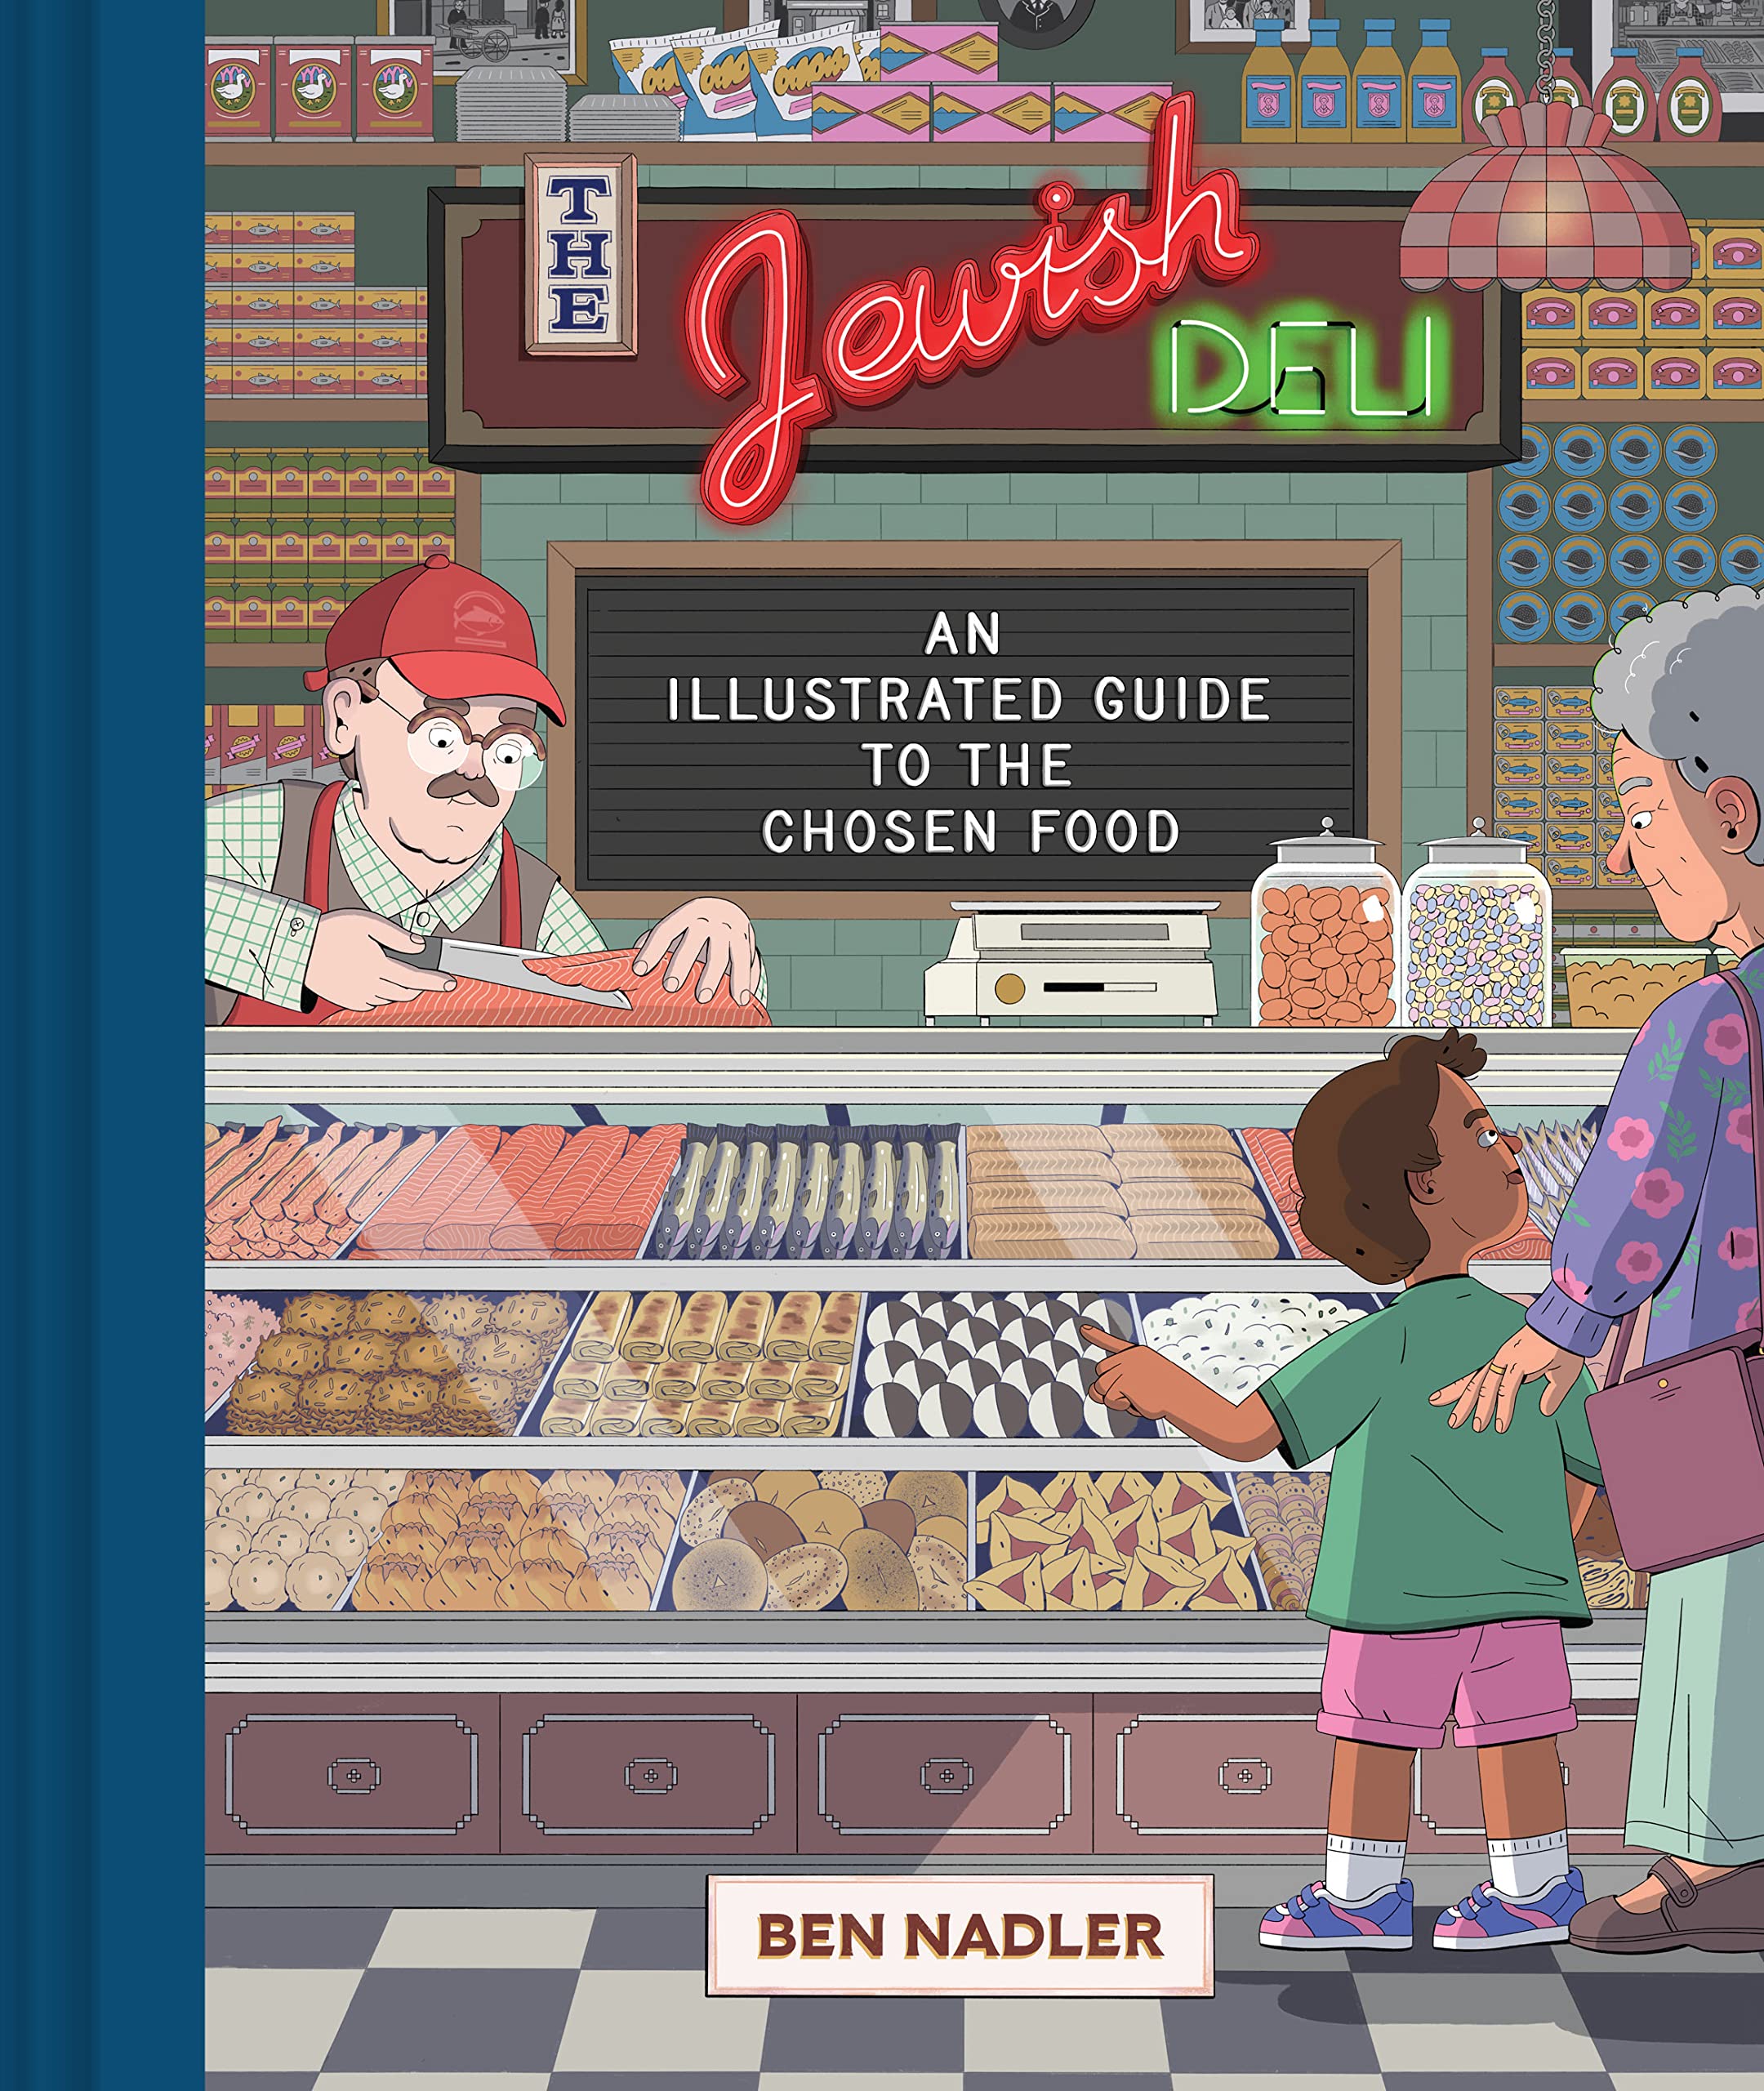 The Jewish Deli: An Illustrated Guide to the Chosen Food book cover